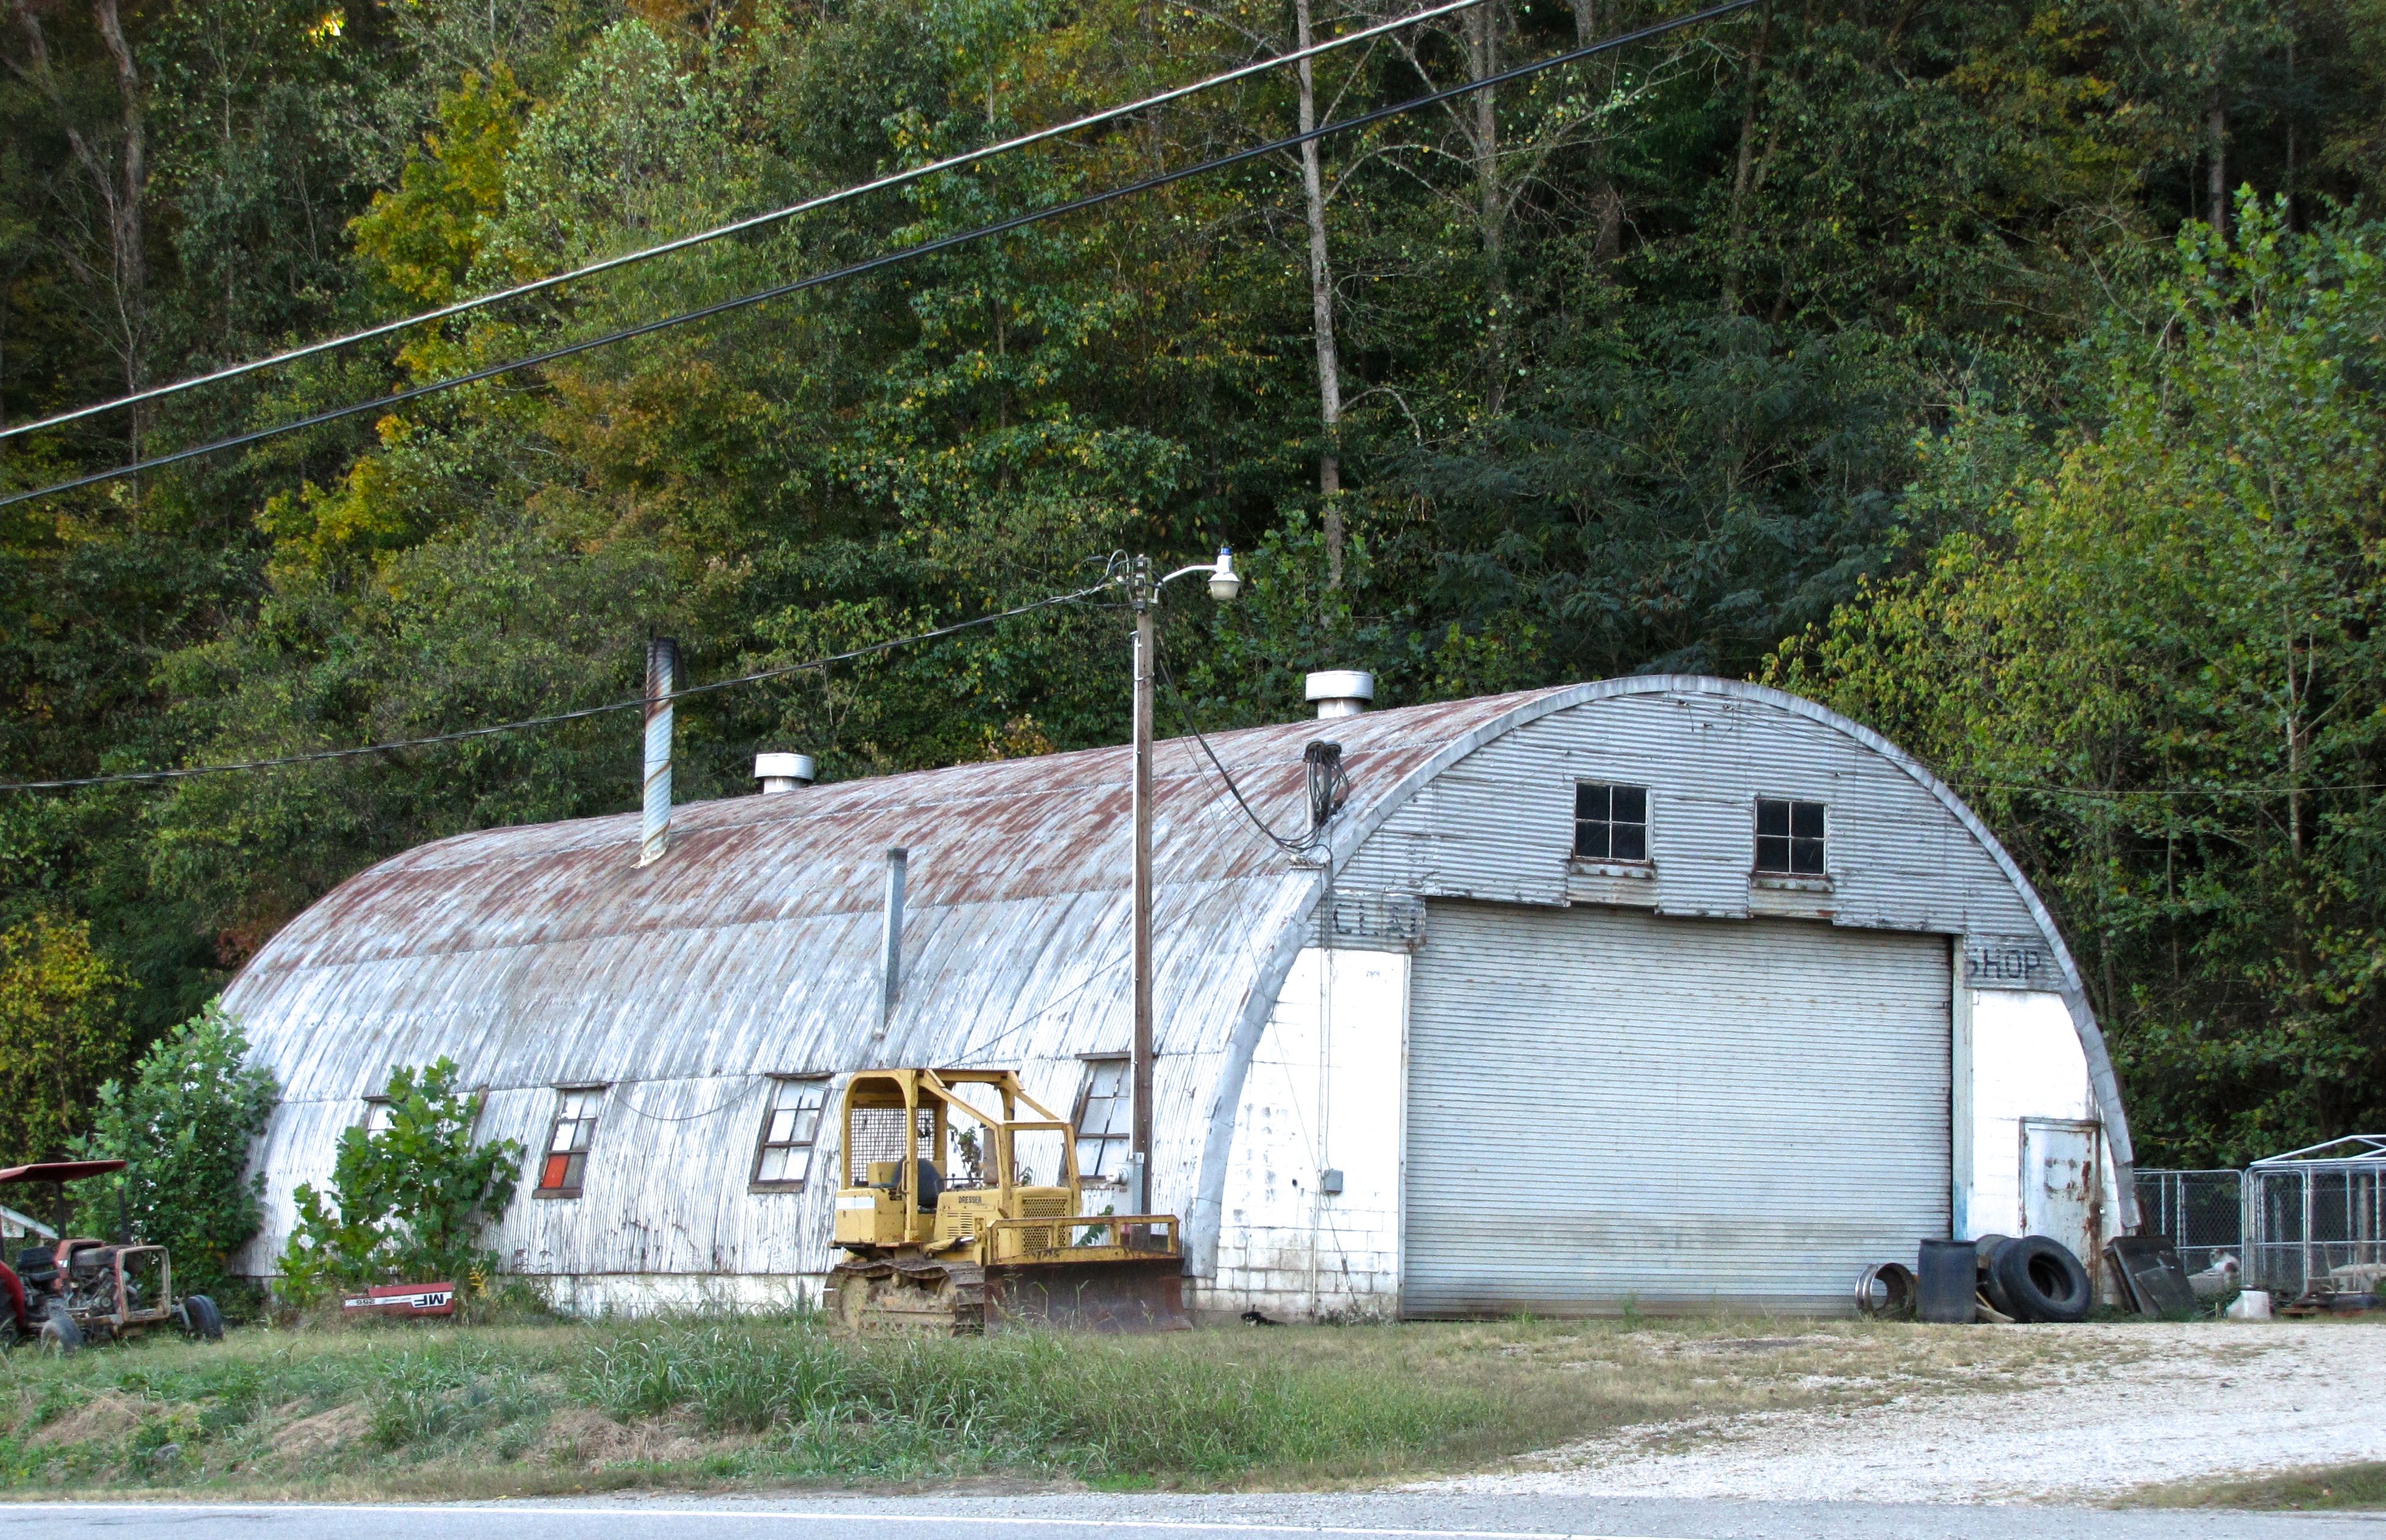 quonset hut in Cleveland, OH